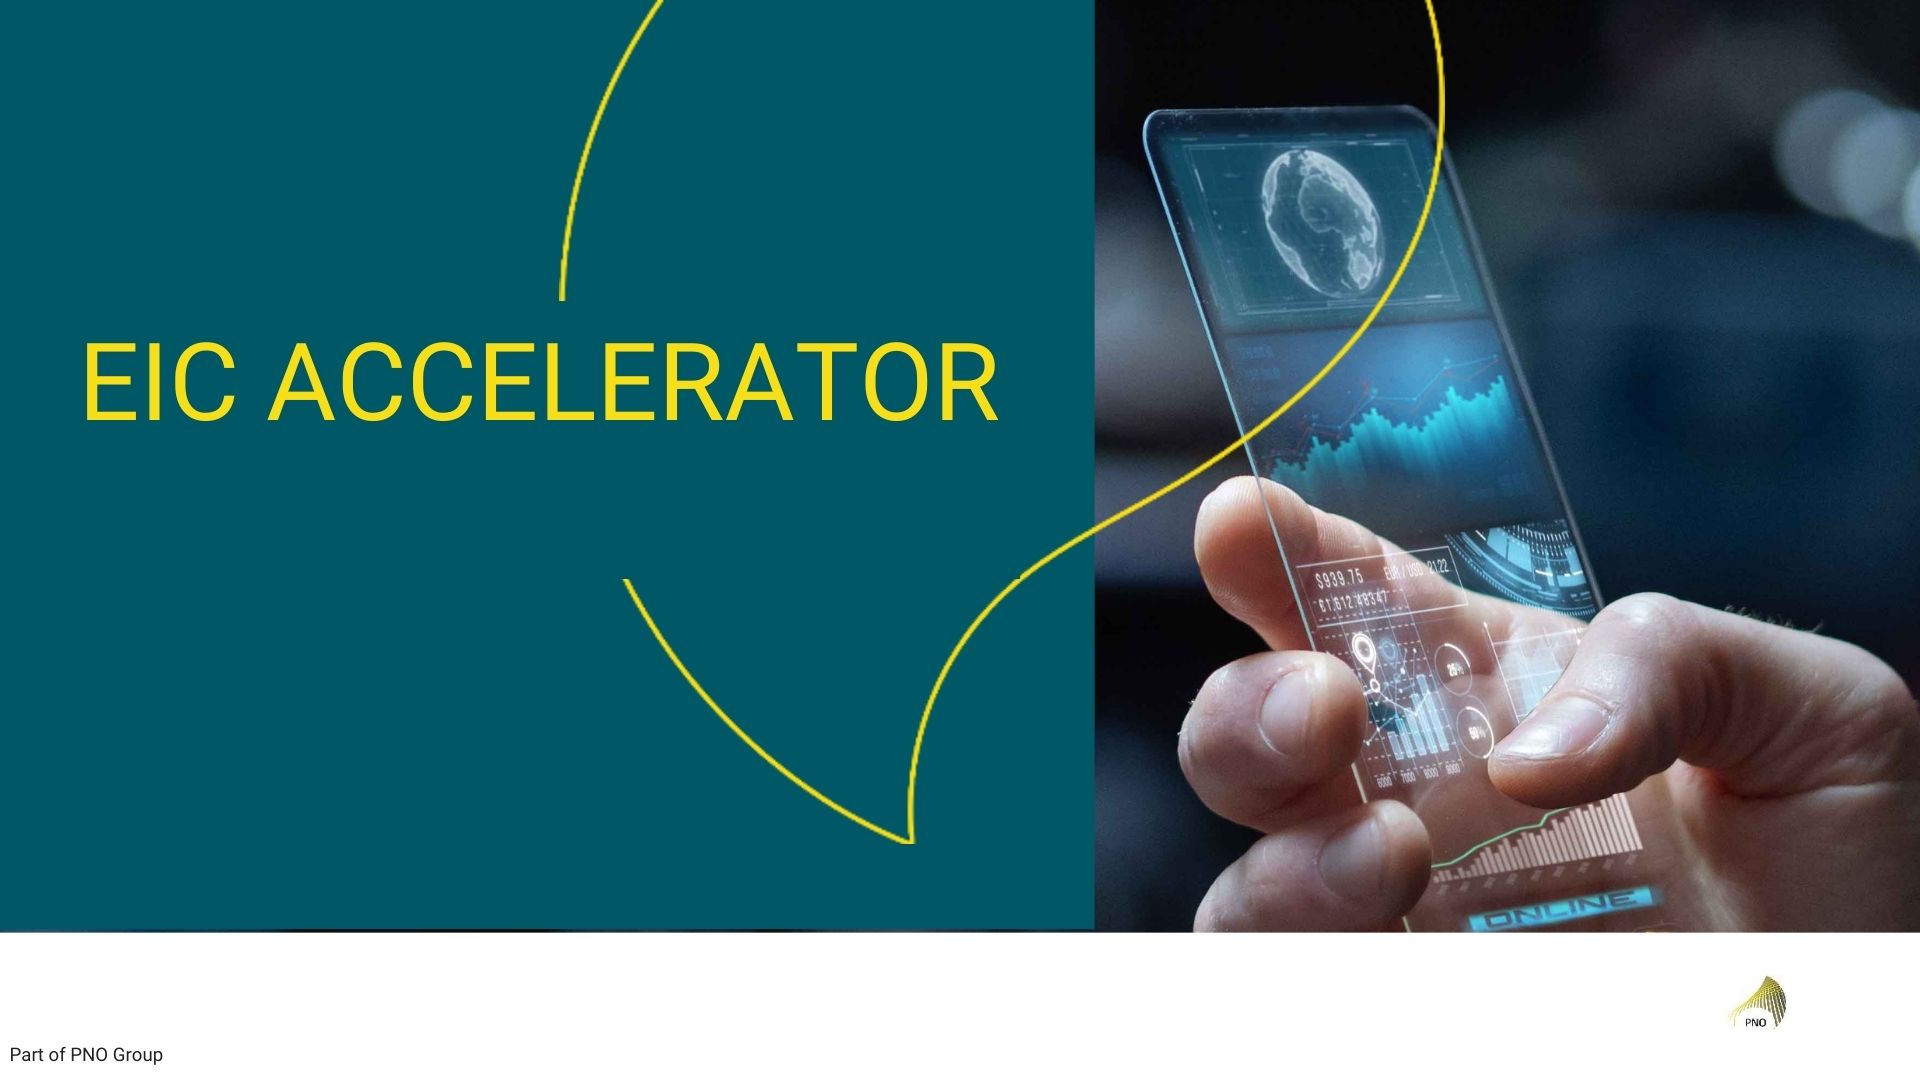 Are you an innovative SME? Working on ground-breaking ideas? Then you may be eligible for the EIC Accelerator.